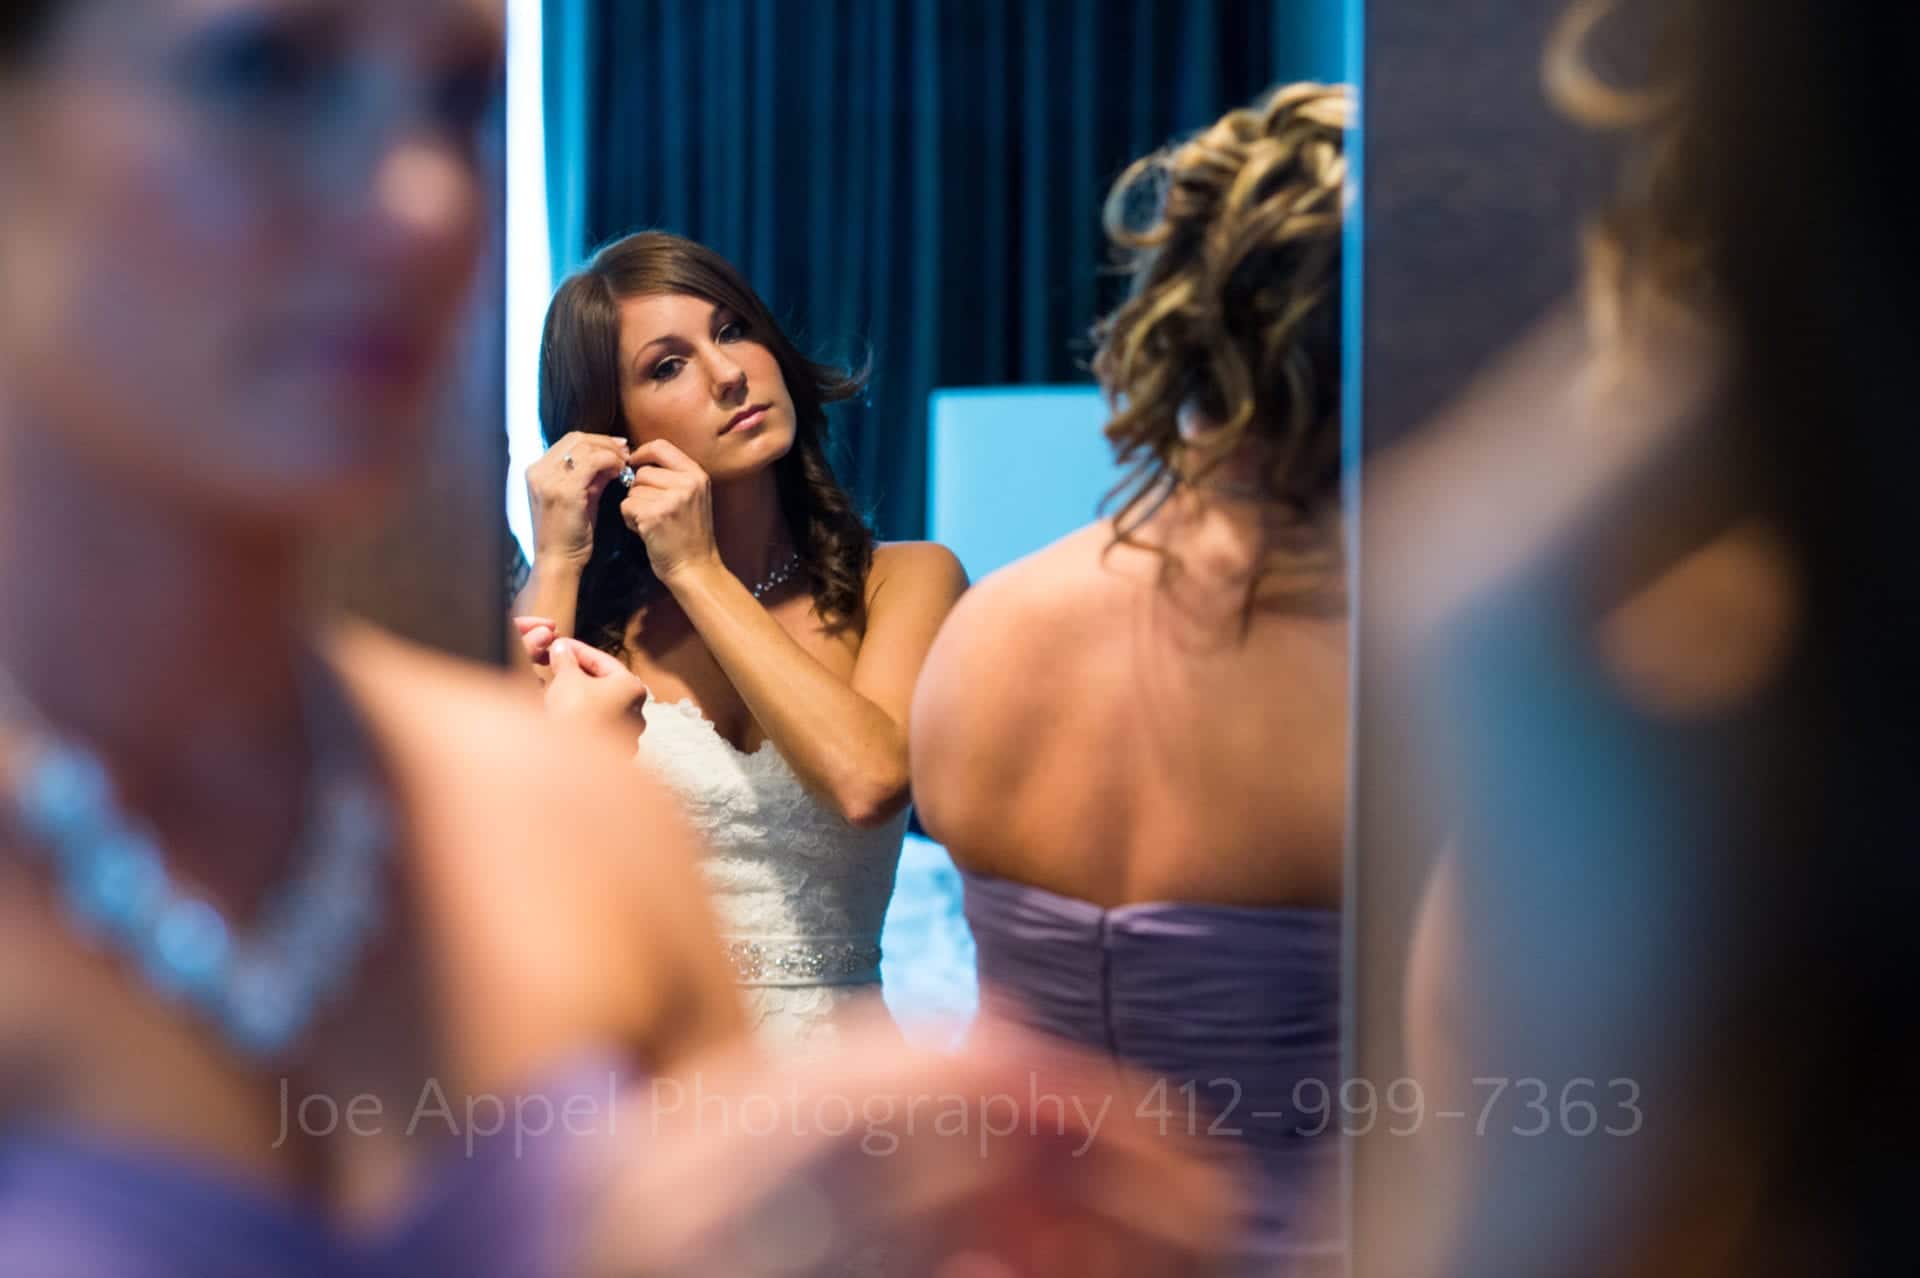 A bride puts an earring on as she looks in the mirror while bridesmaids in purple dresses get ready next to her Fairmont Hotel Pittsburgh Weddings.